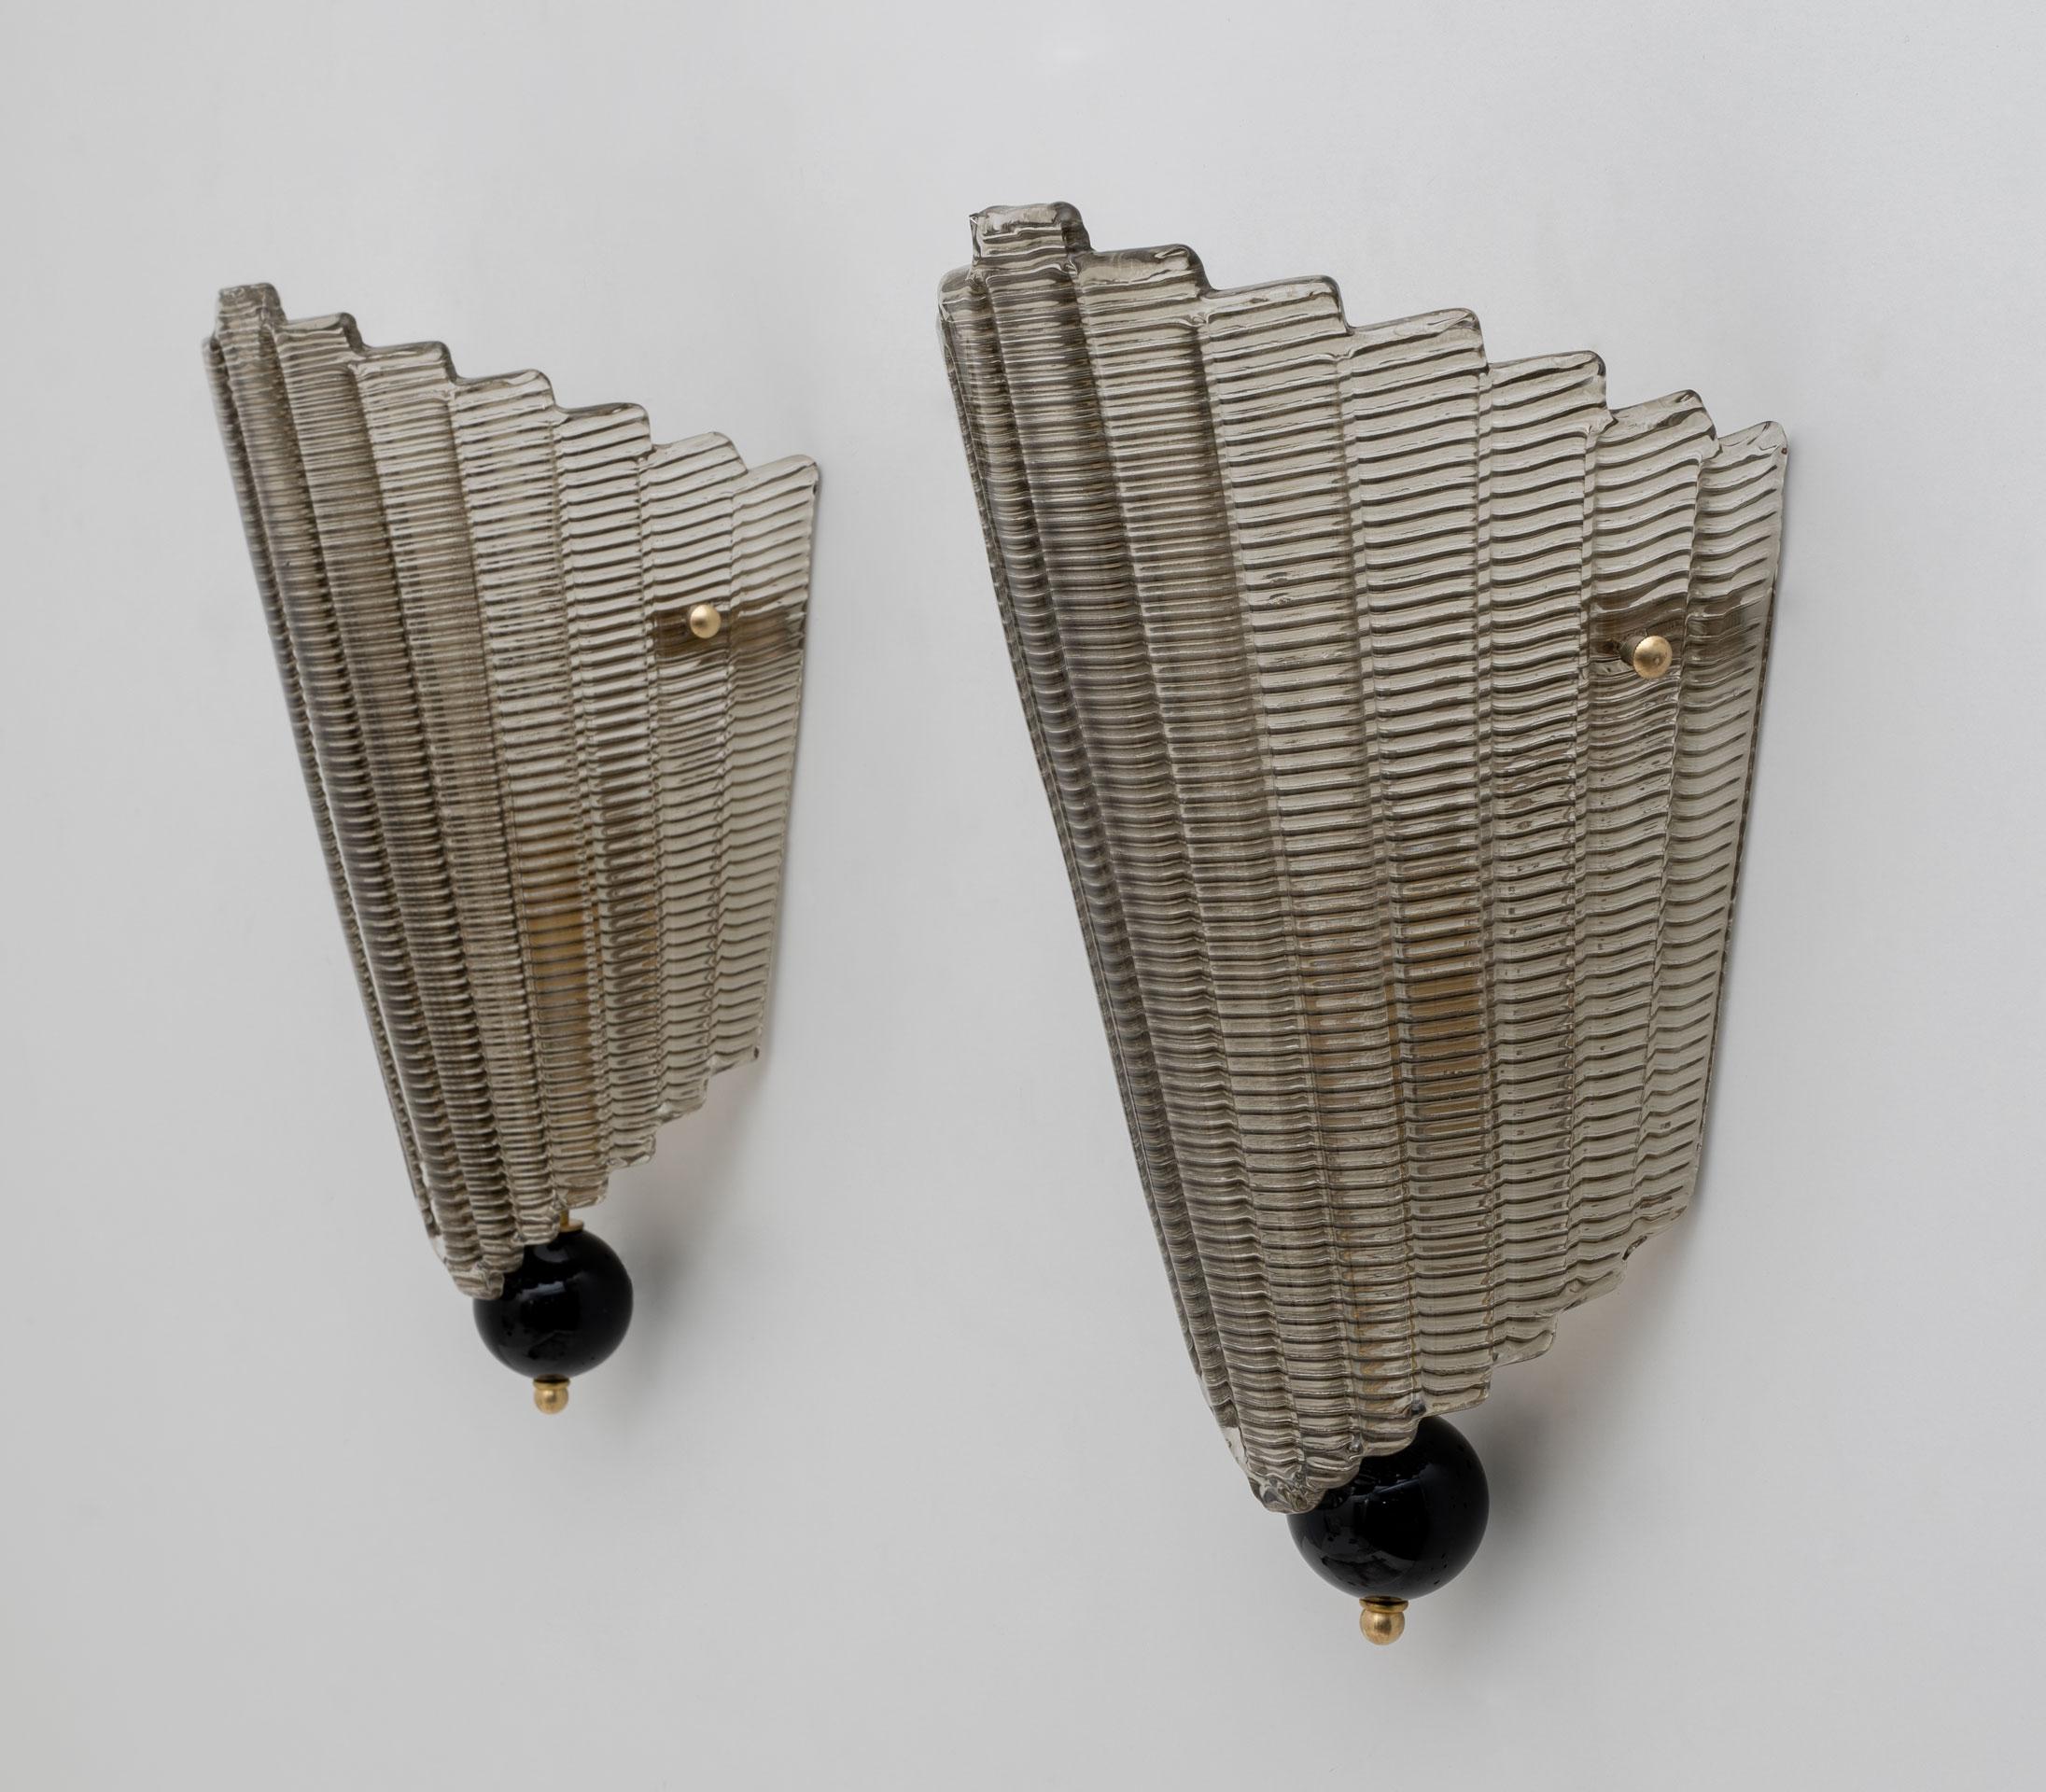 Pair of wall lamps in structured Murano glass. The glass is ribbed and has a curved design, creating a superb decorative impact, completely enclosed by a glass plate and a glass ball finial, in the Art Deco style. Each wall light requires a medium